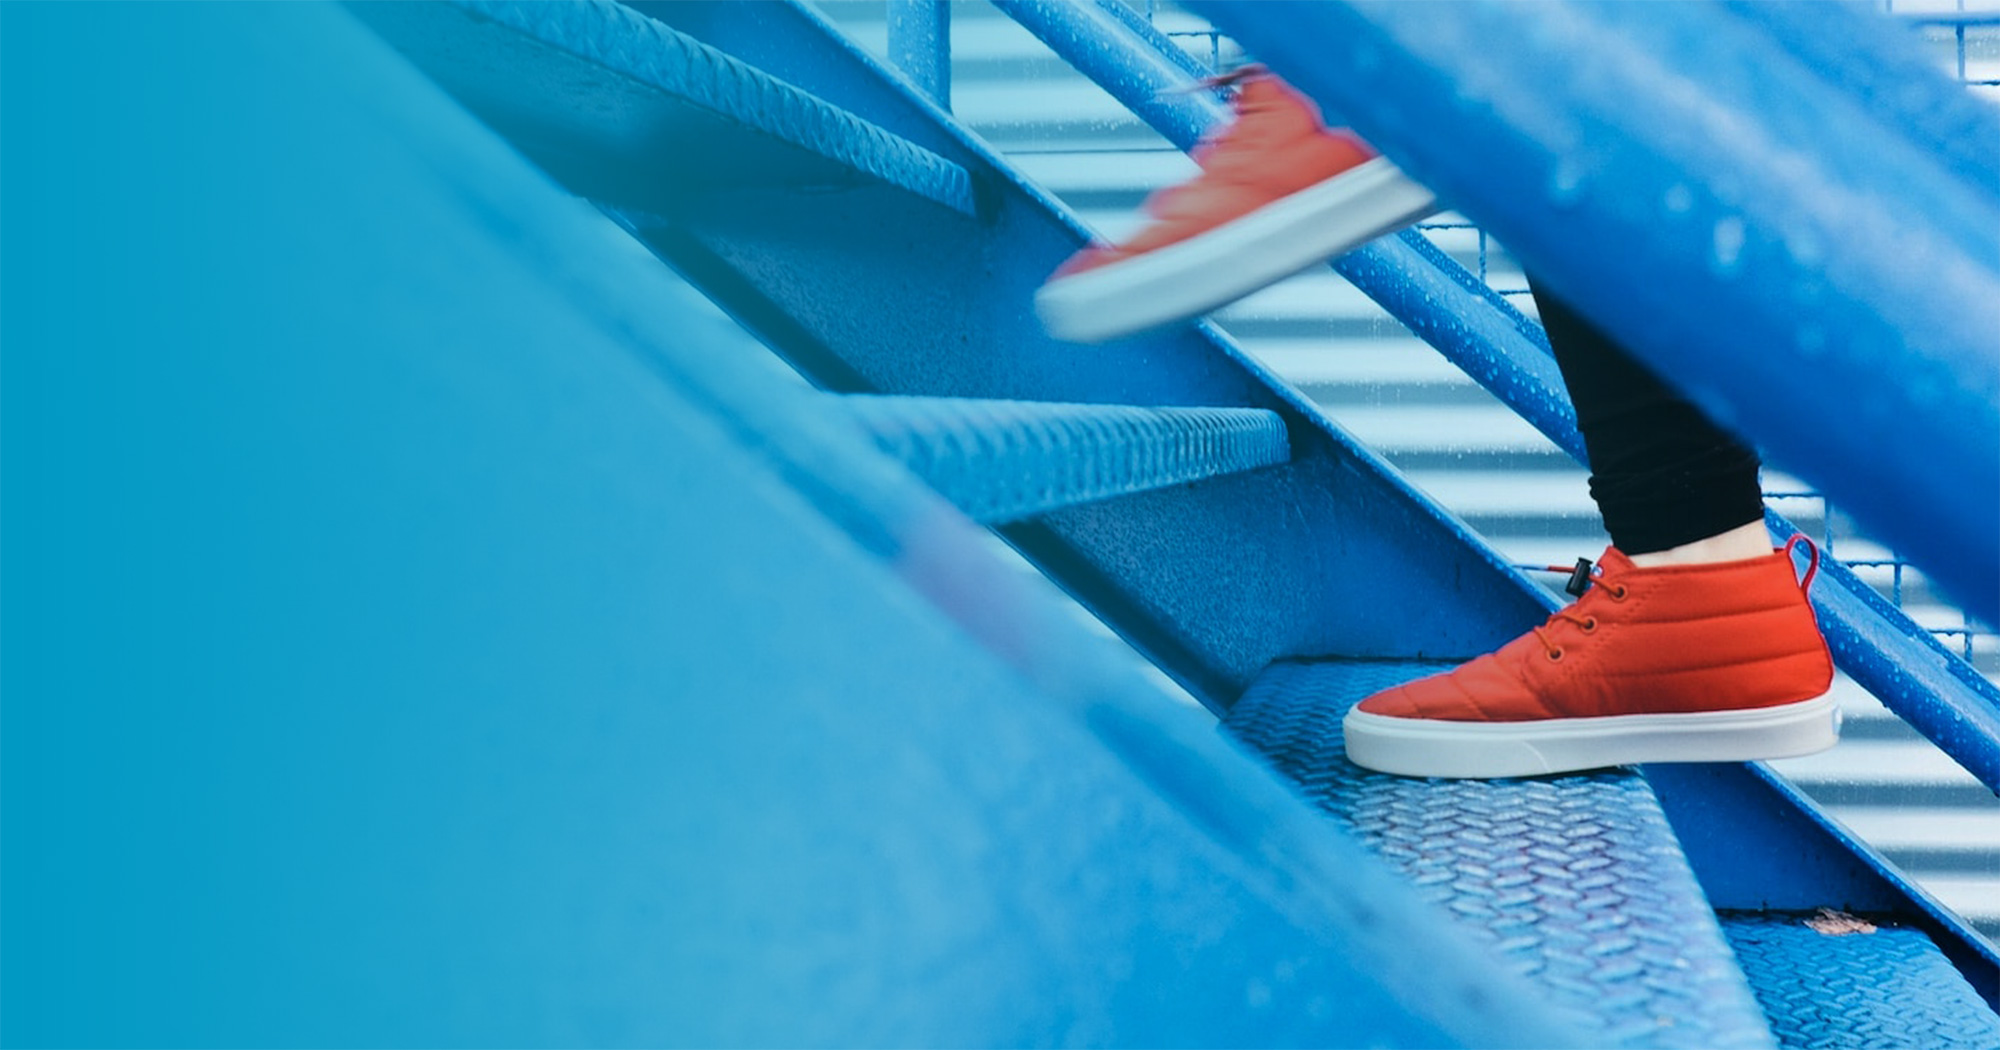 Person with orange sneakers climbing up a blue metal staircase